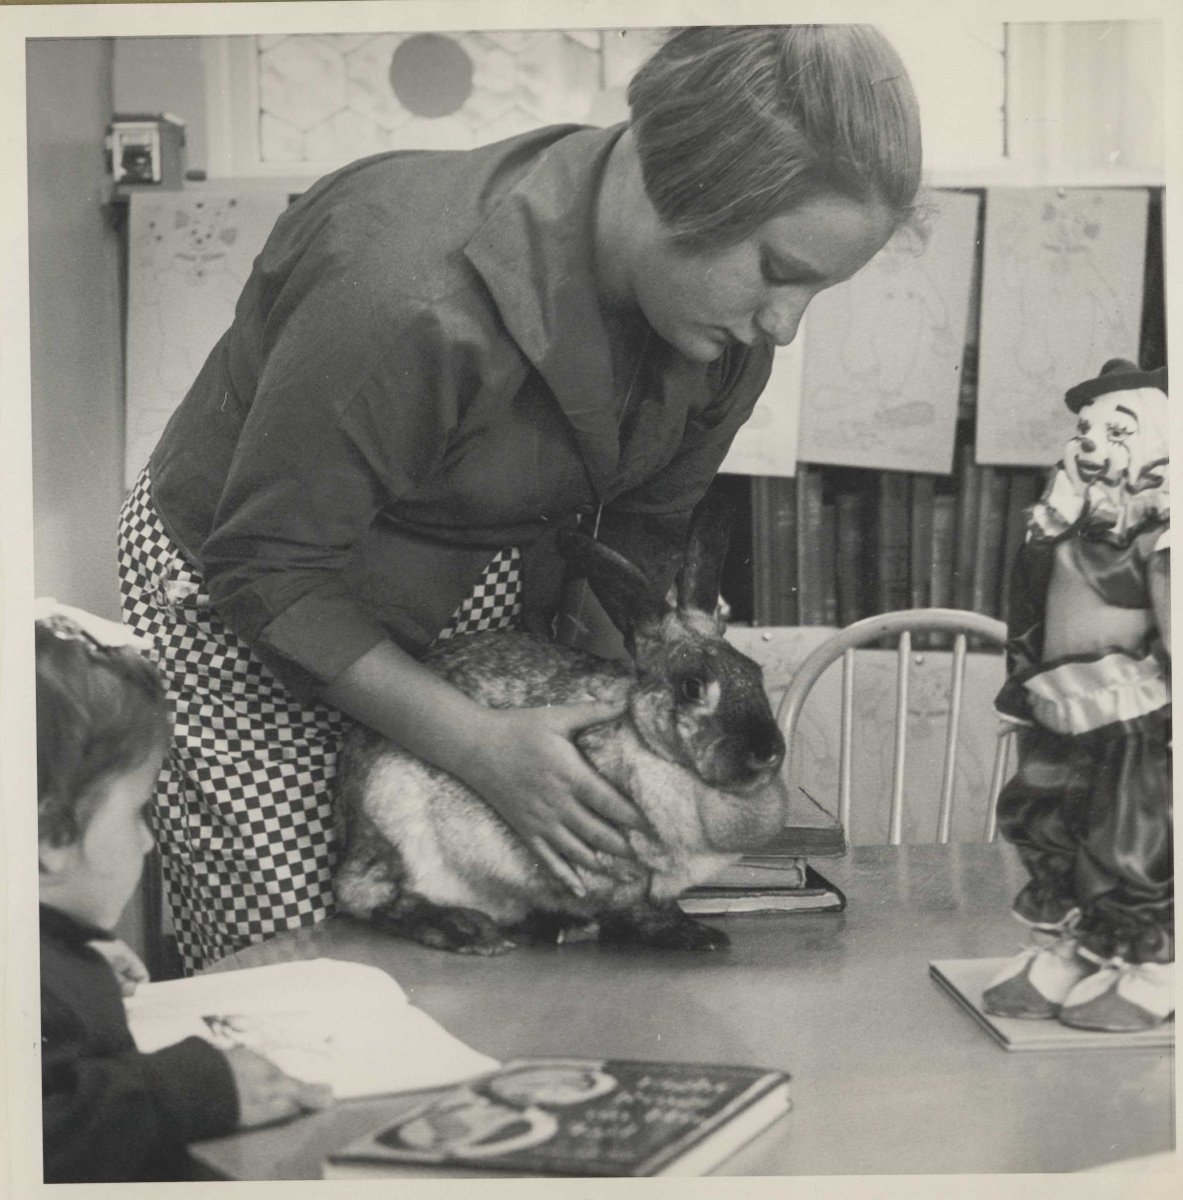 It's your weekly #tbt! Remember Jenny the library cat? We present to you, PETER THE LIBRARY RABBIT. The Alameda Free Library was THE hangout spot for Jenny and Peter. 

This photo is from the Boys & Girls Library in 1955. https://t.co/PRj96HJFuv